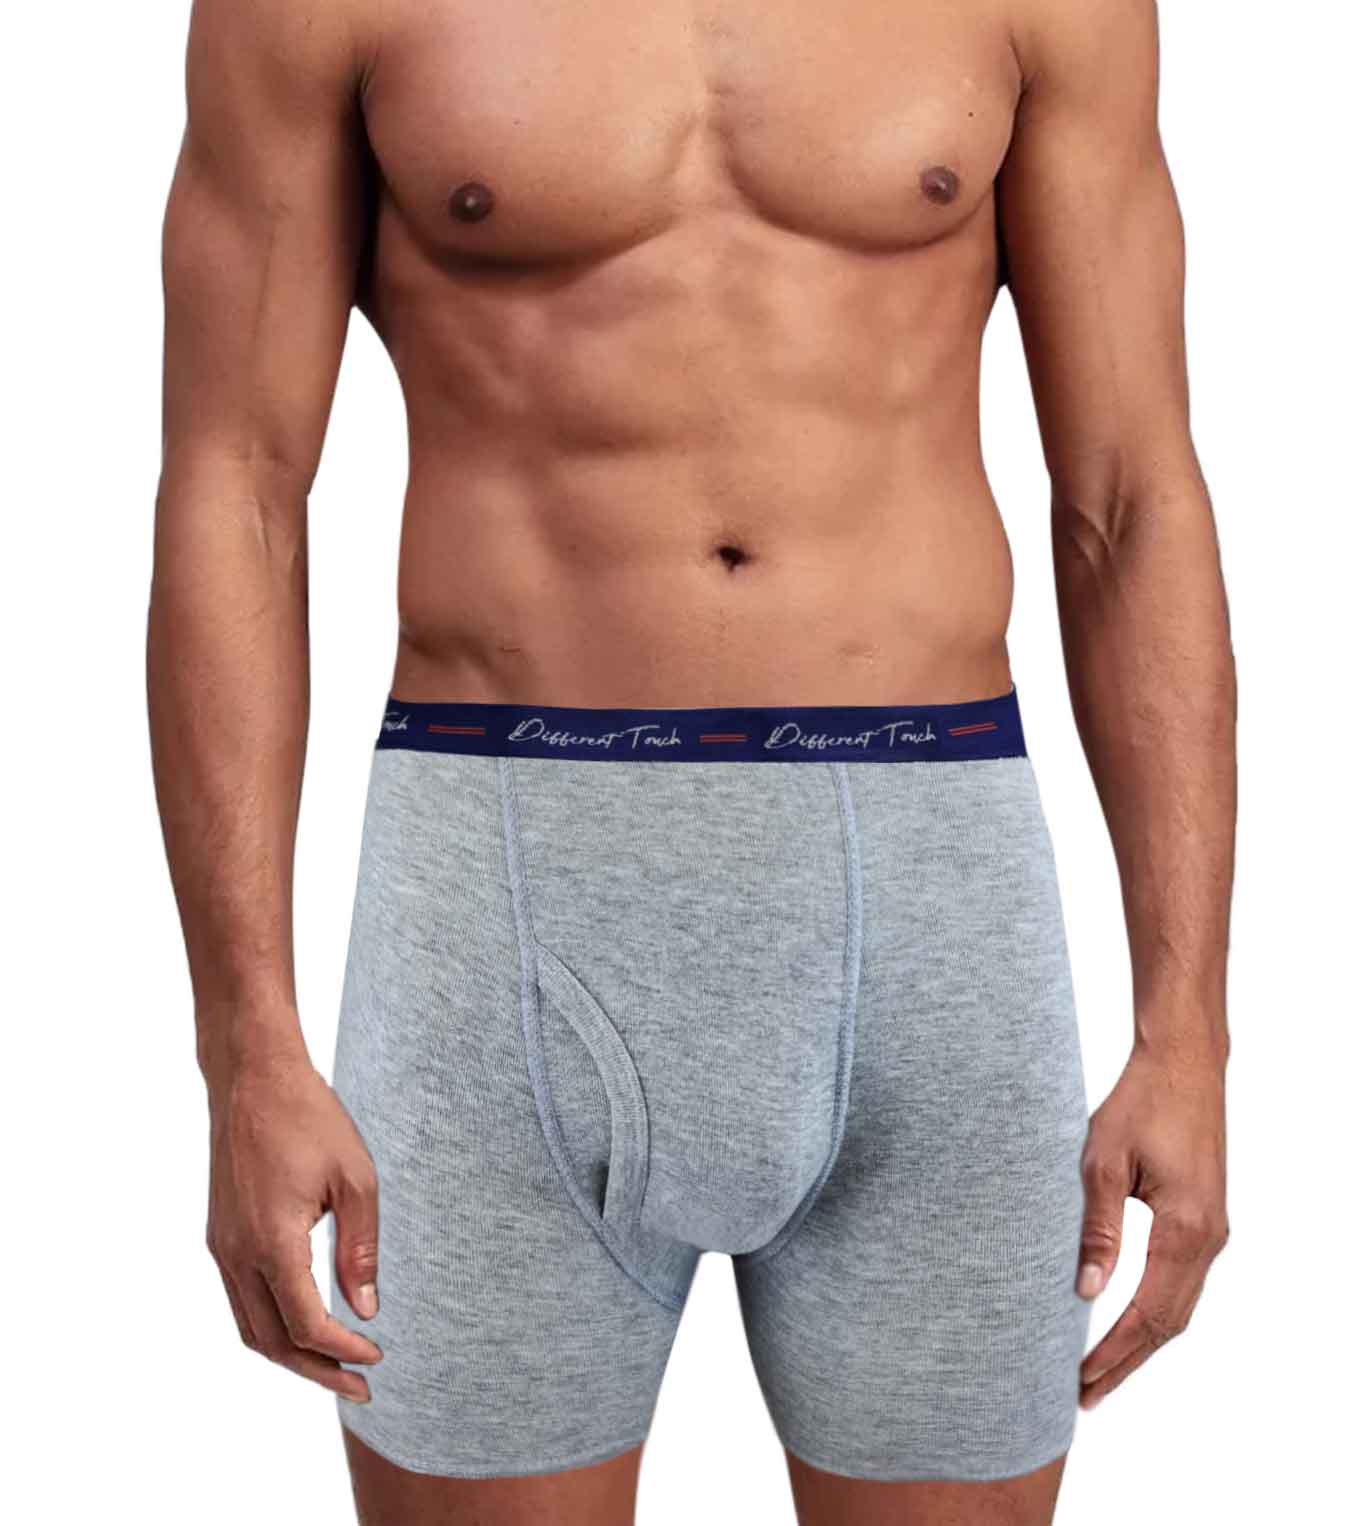 Different Touch Boxer Briefs for Men